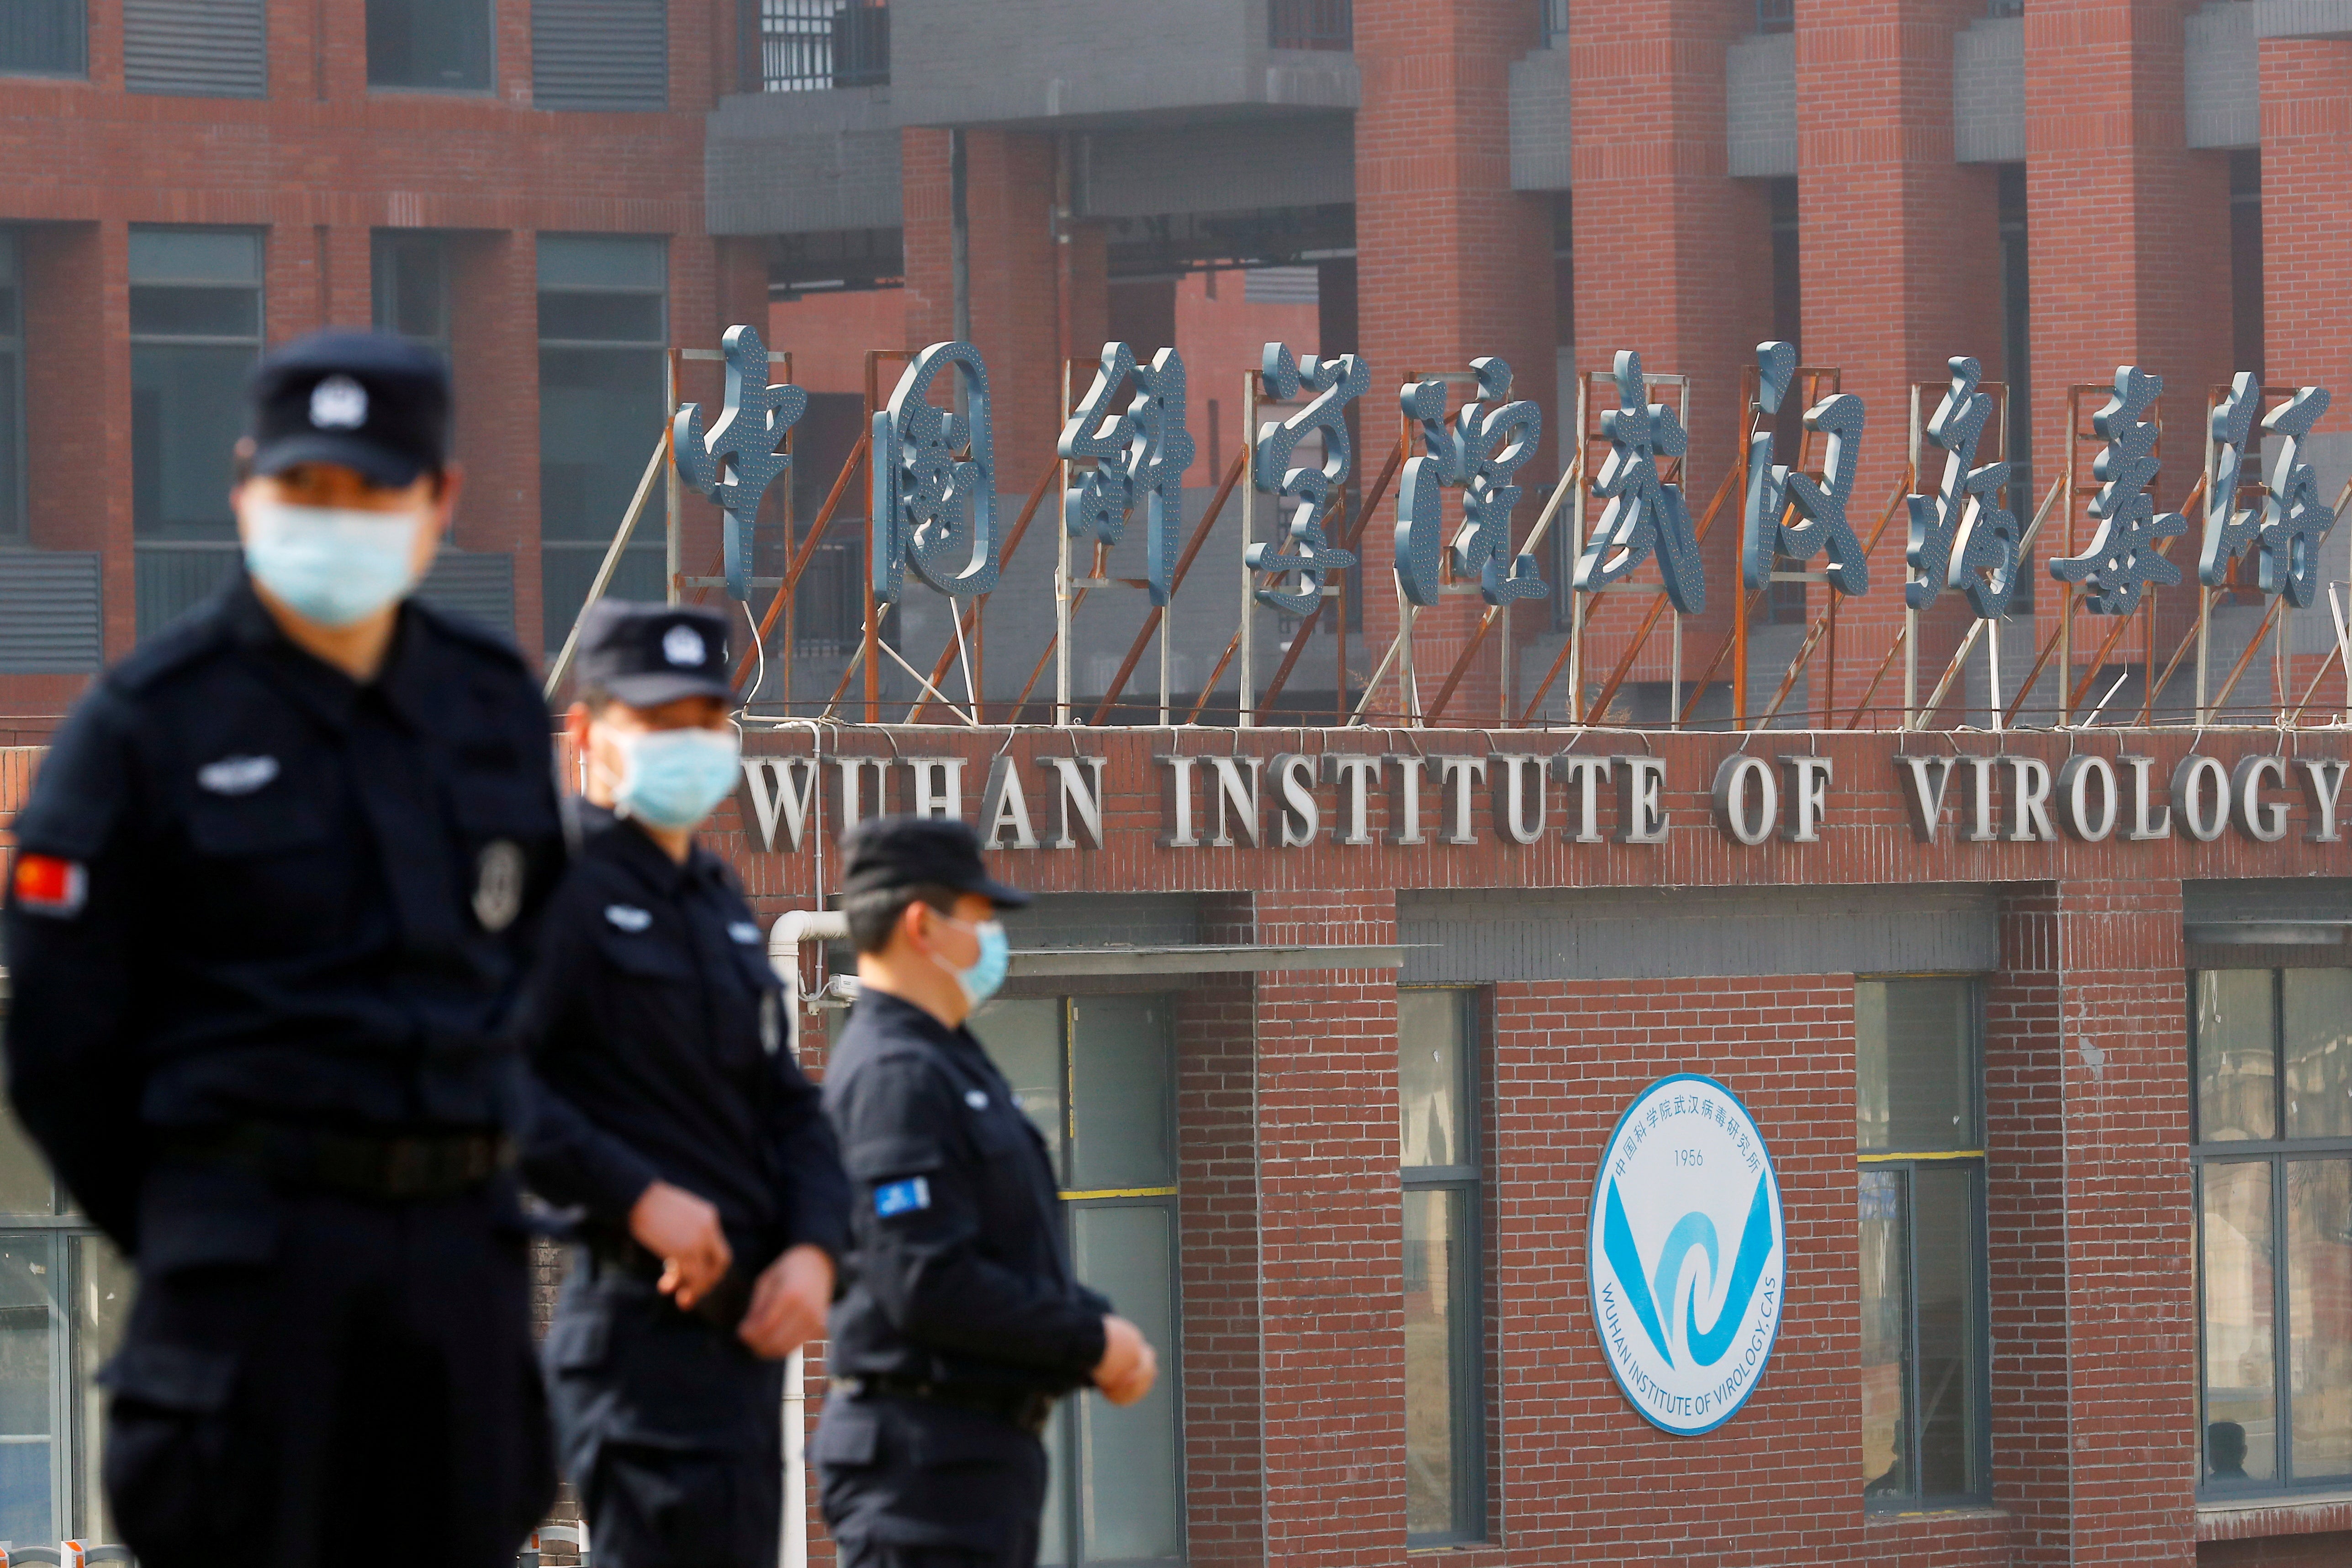 The Wuhan Institute of Virology is a global centre for coronavirus research